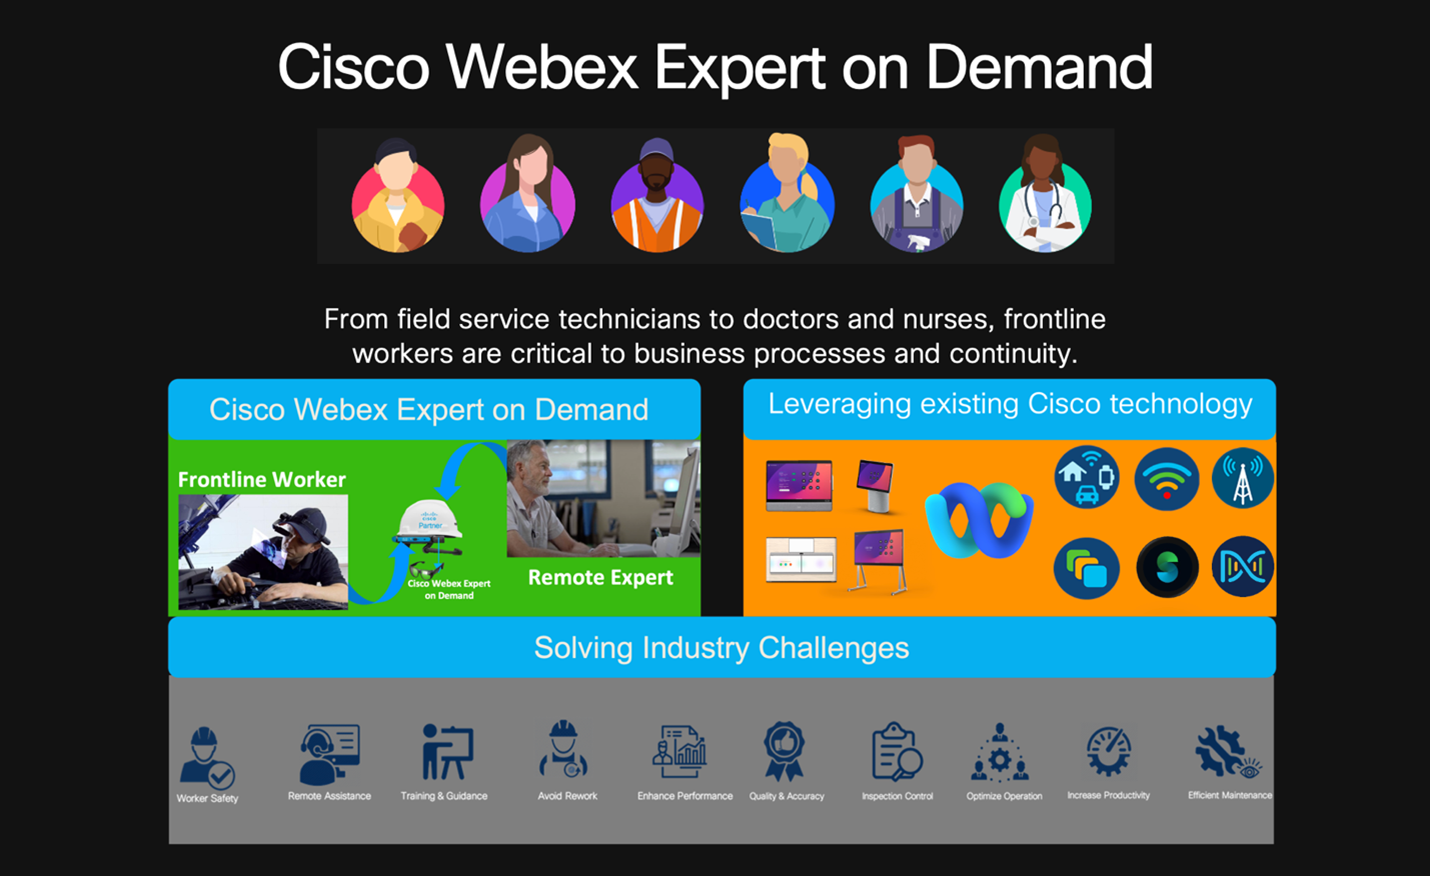 Panoramica concettuale di Webex Expert on Demand